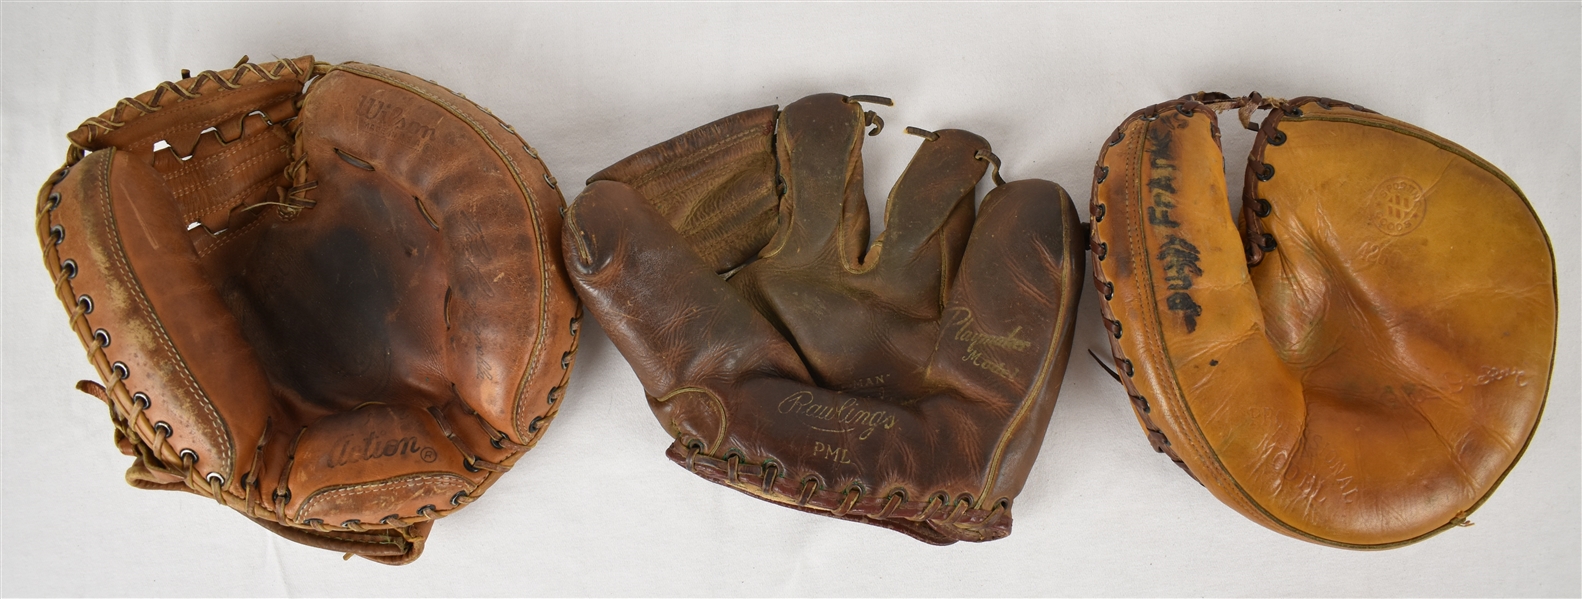 Stan Musial Bill Dickey & Roy Campanella Store Model Gloves